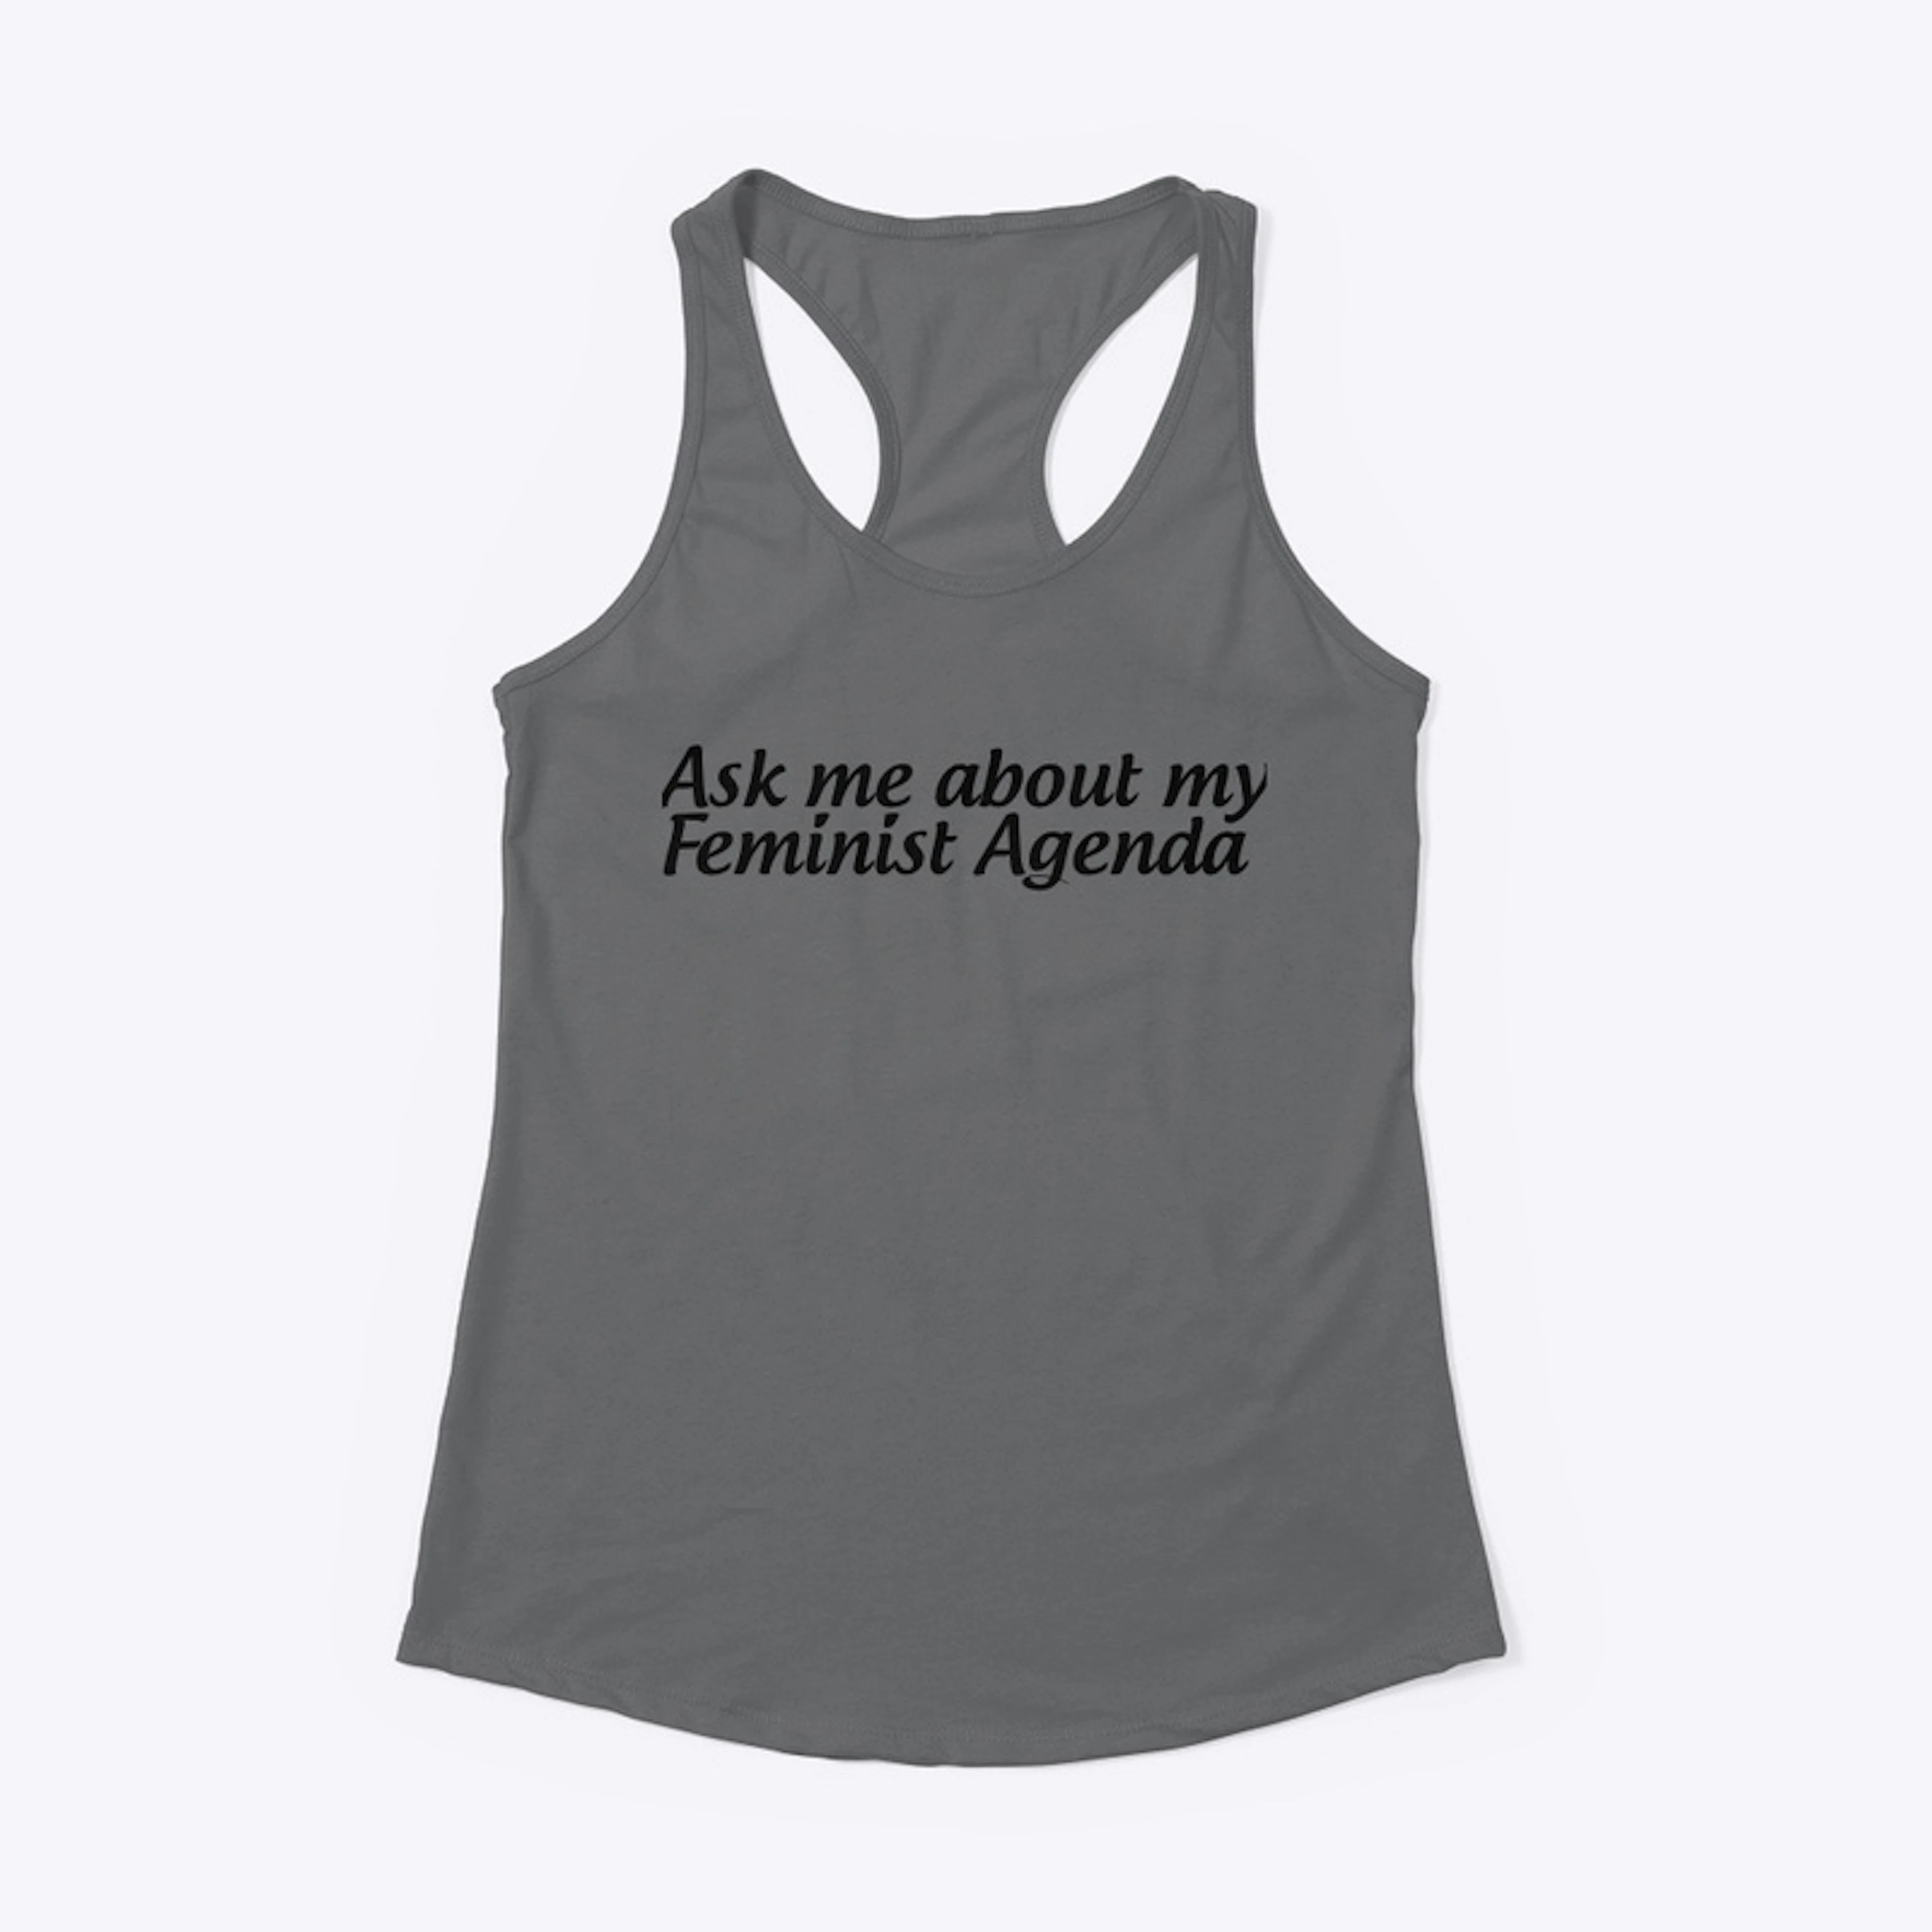 Ask me about my feminist agenda